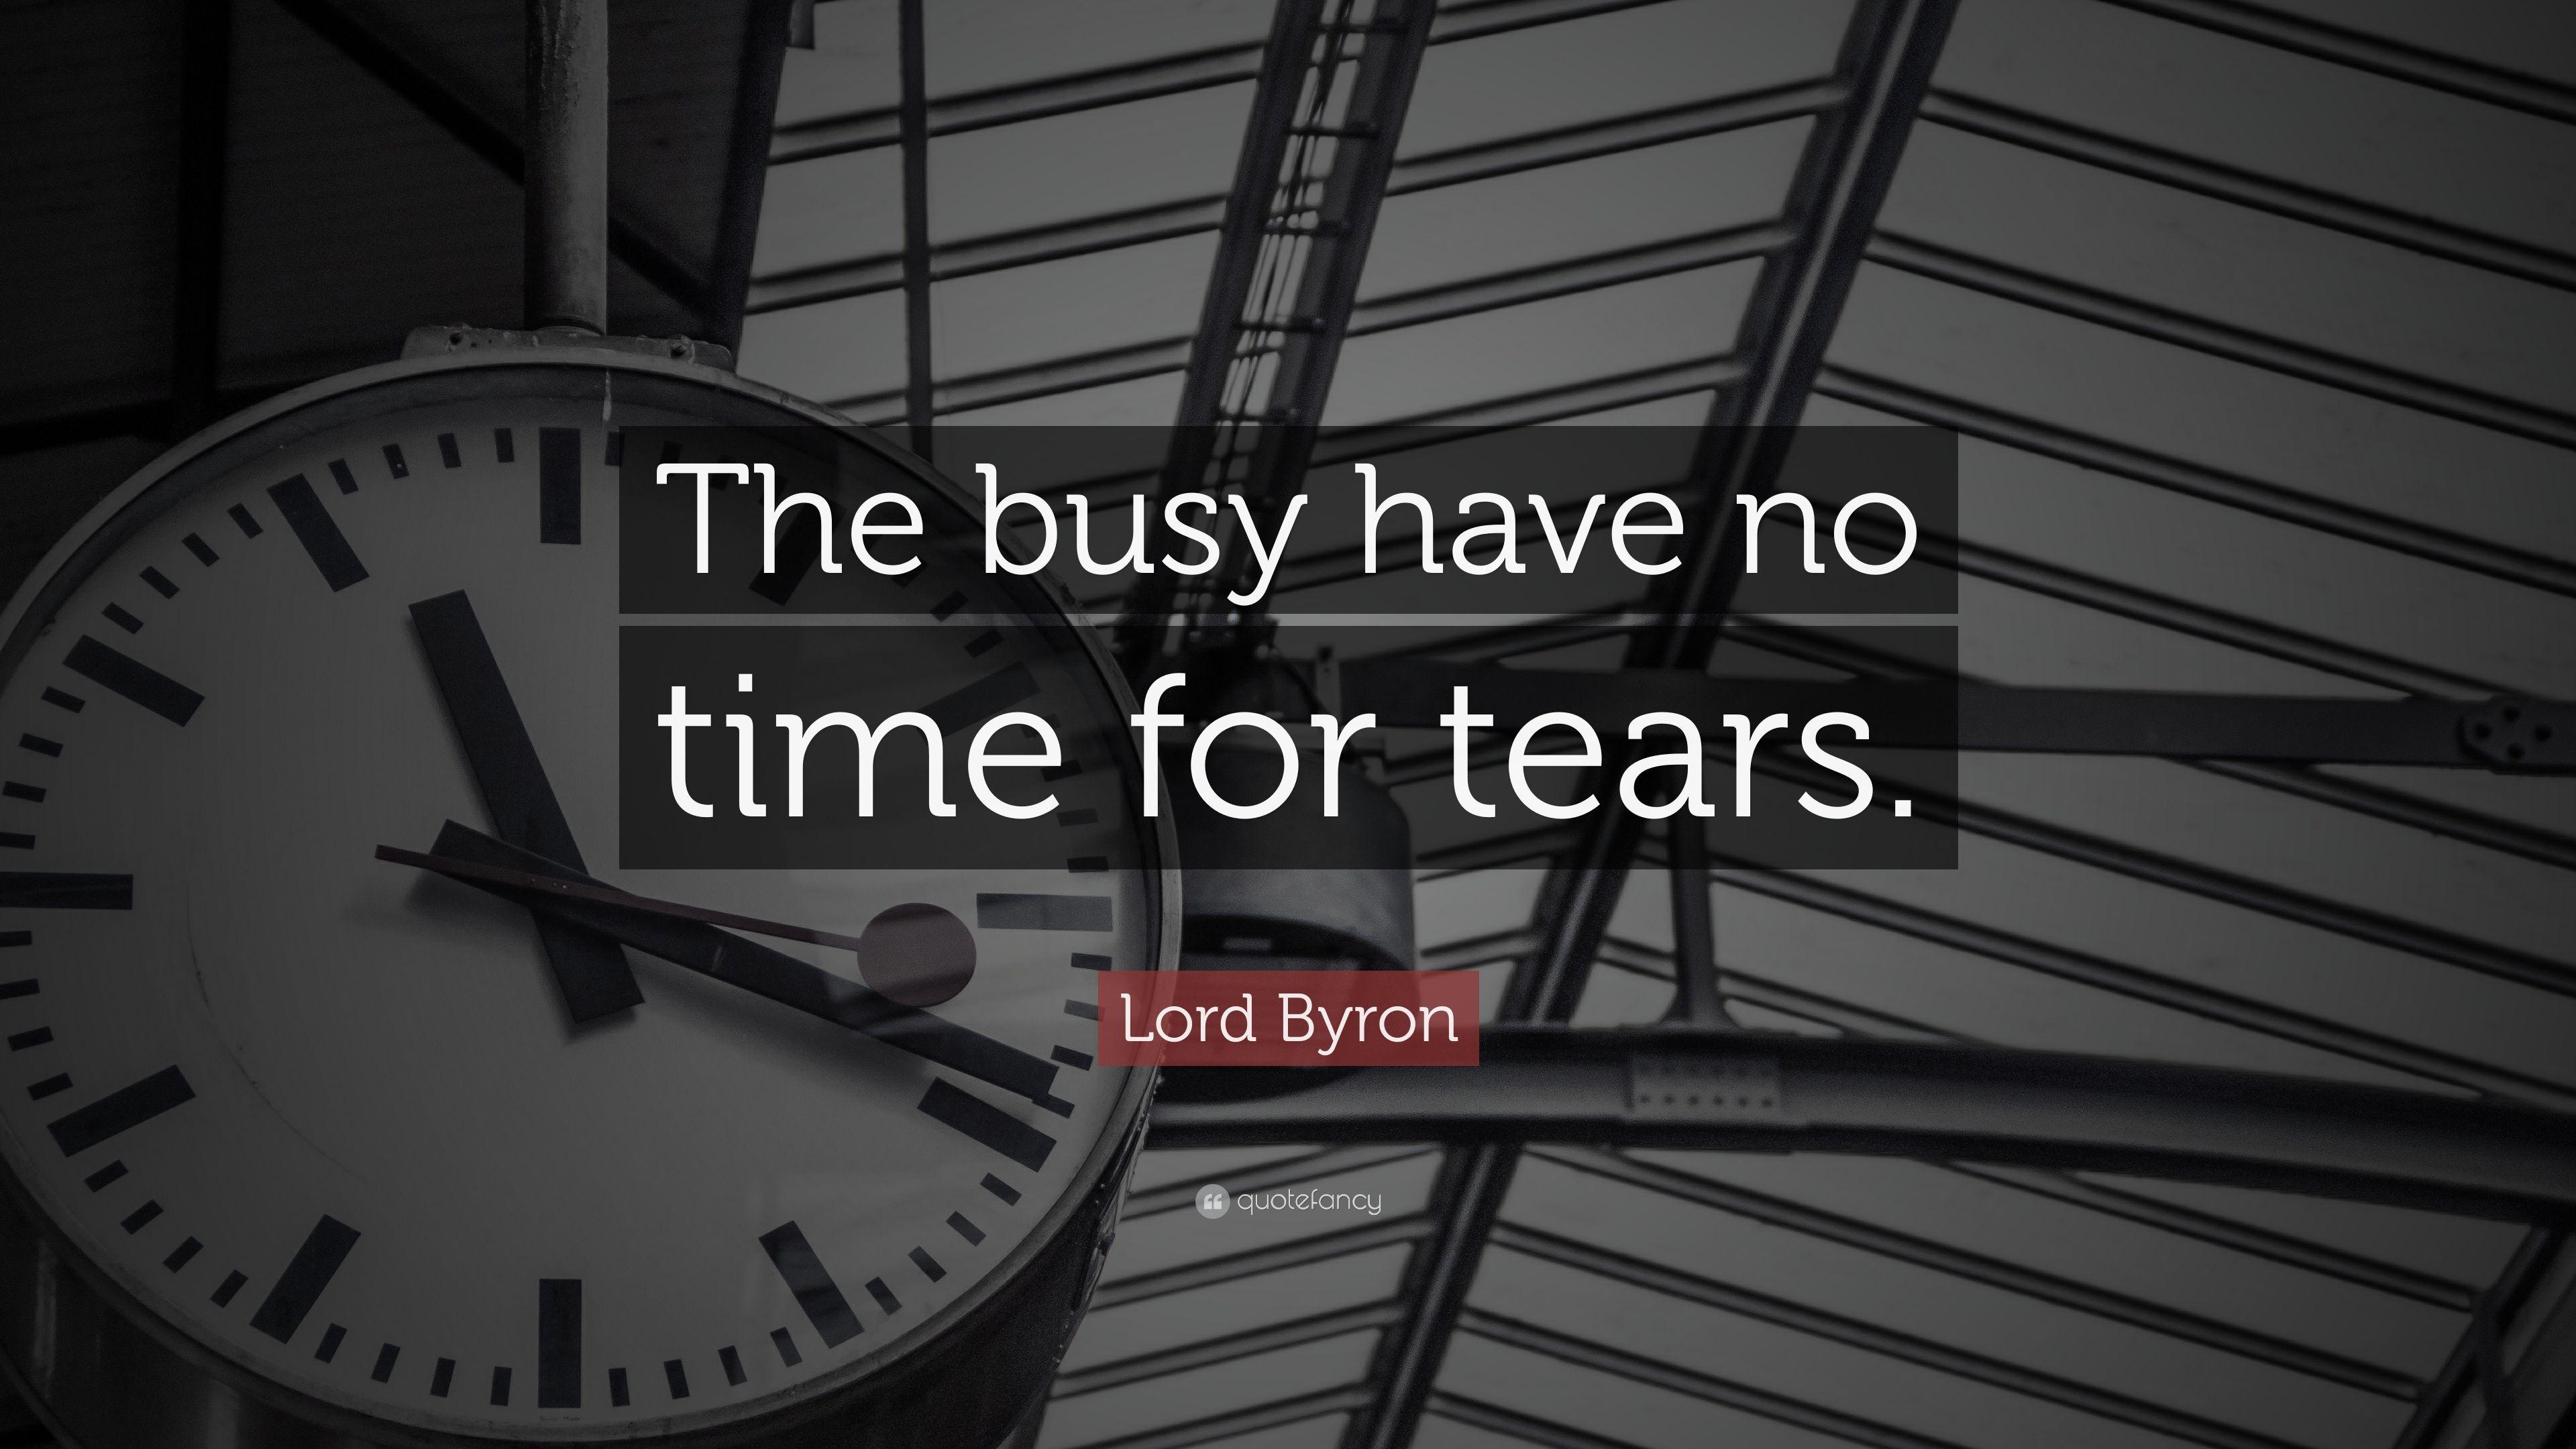 Lord Byron Quote: “The busy have no time for tears.” 12